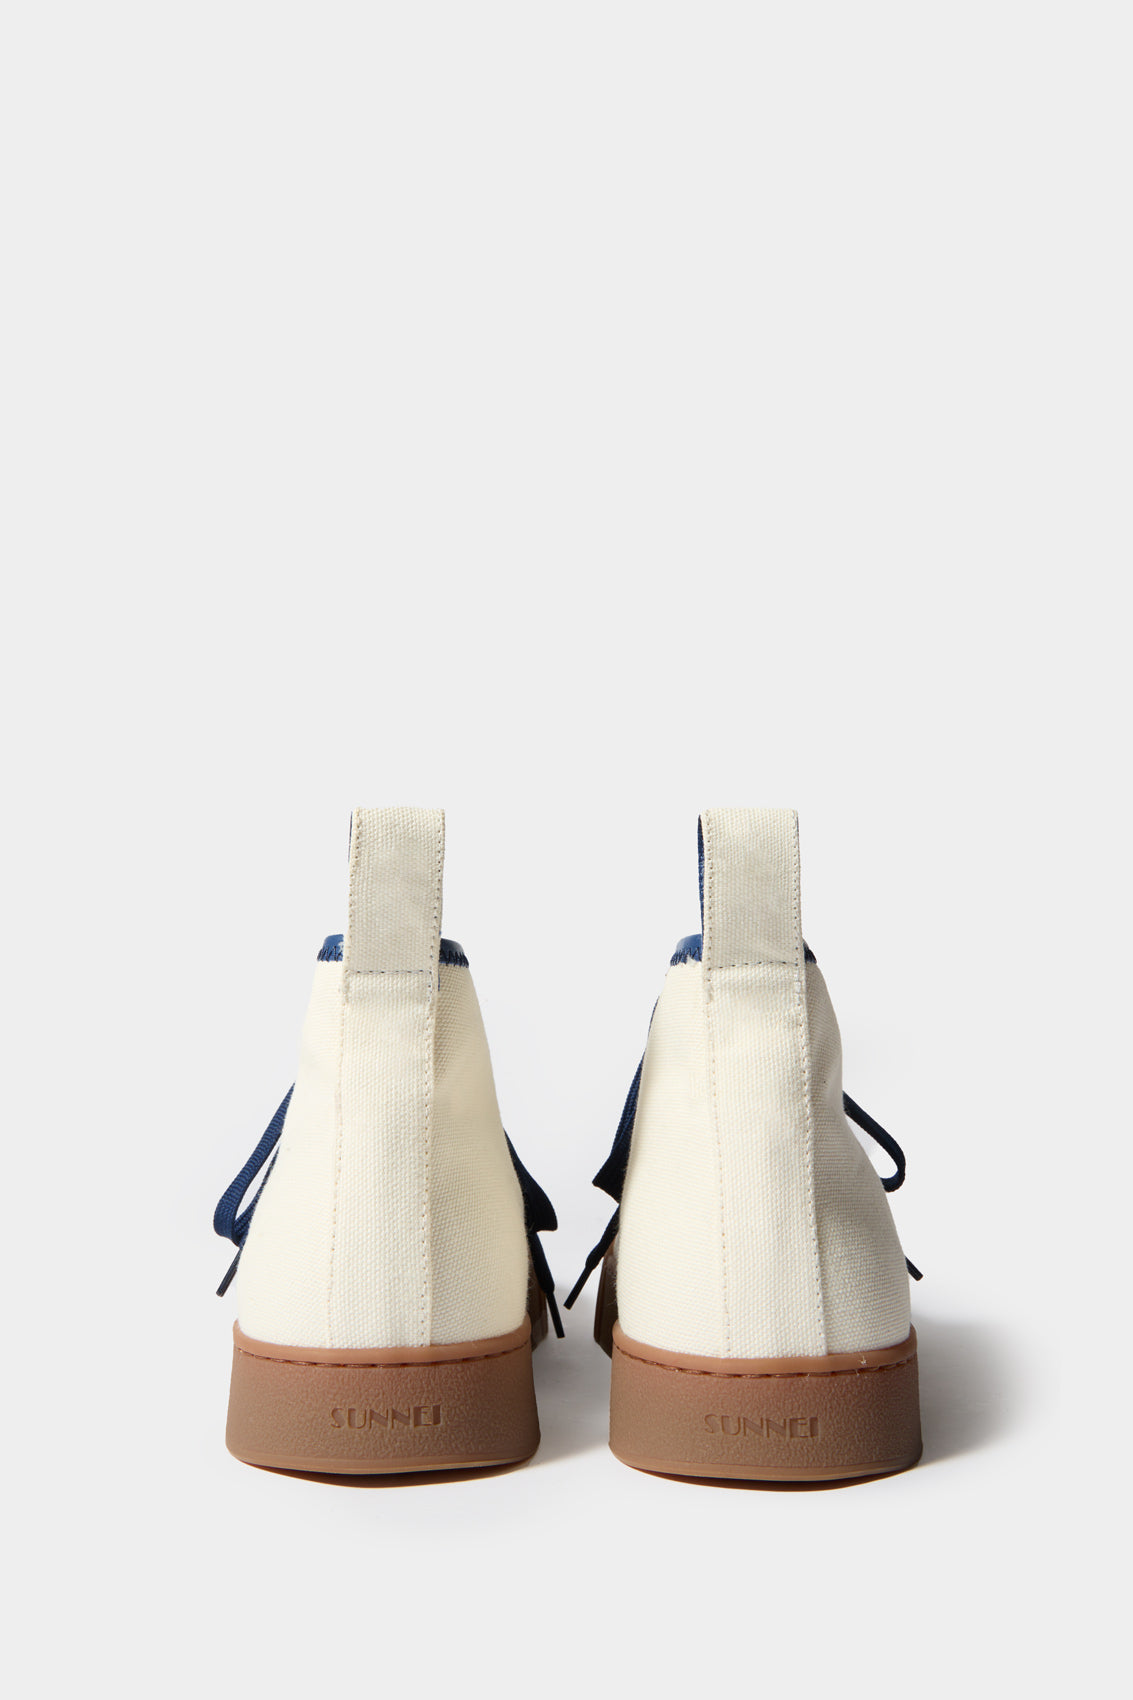 ISI SHOES / white and bluette